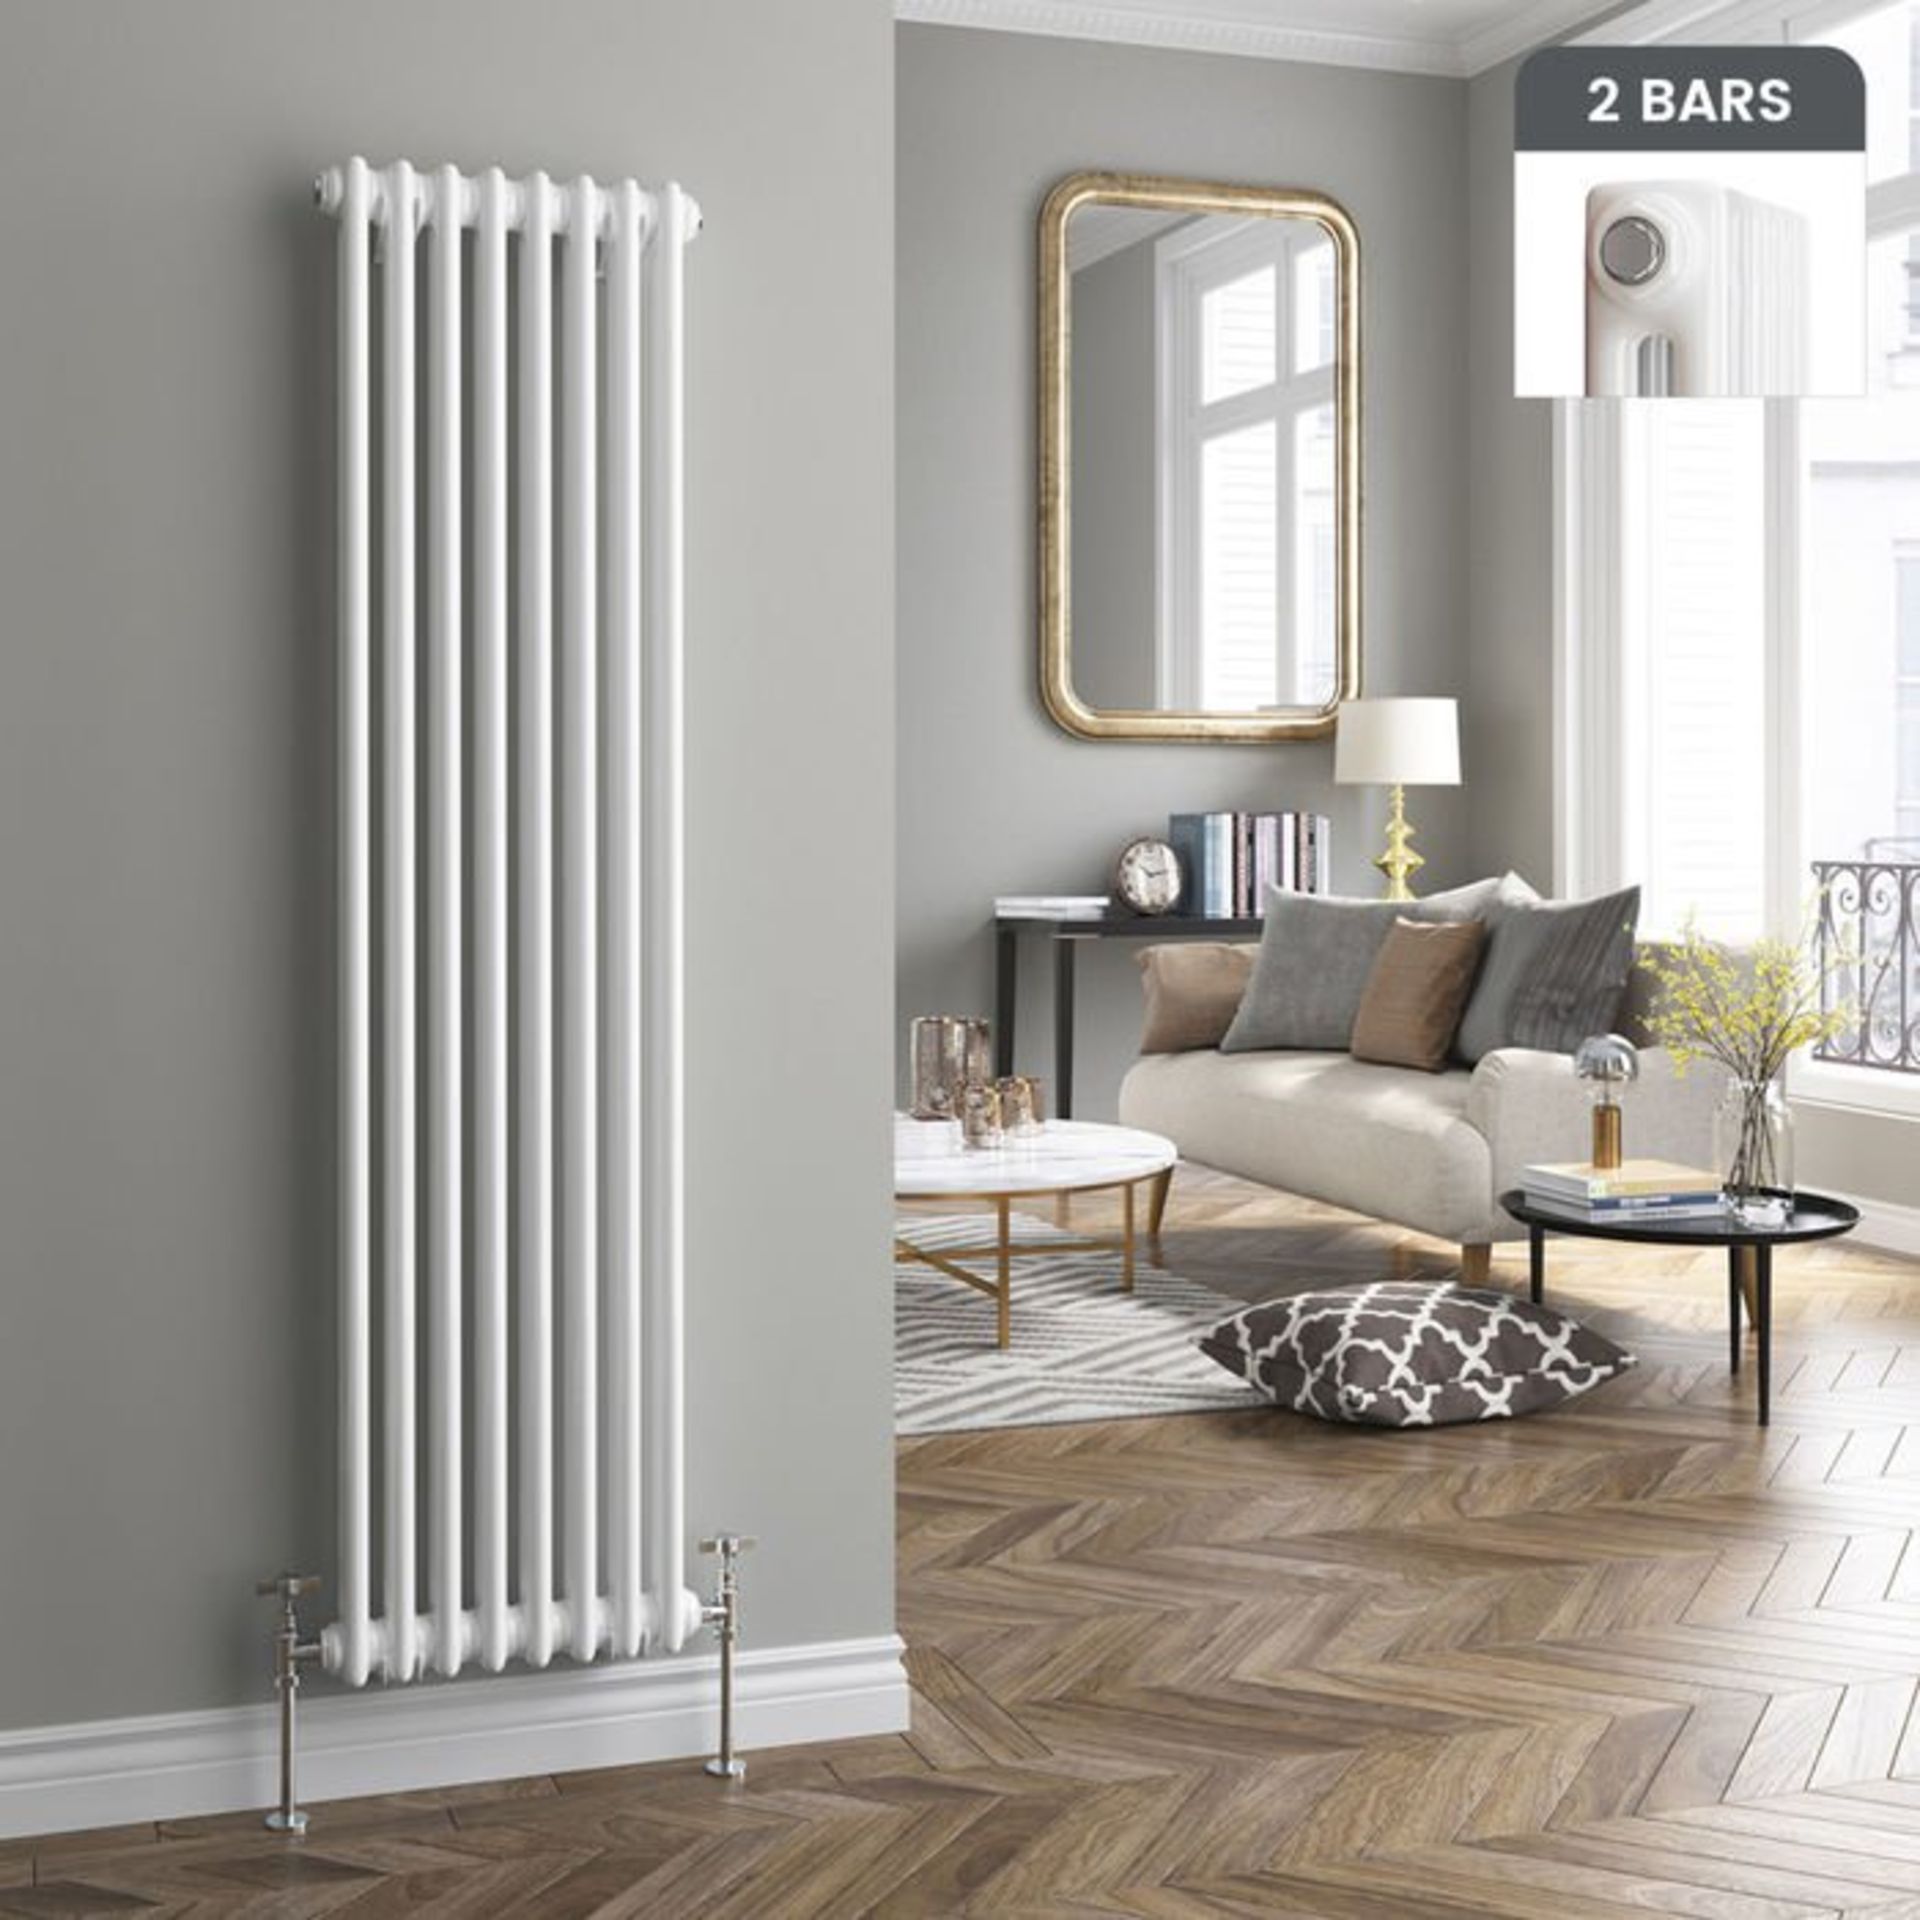 (L115) 1500x380mm White Double Panel Vertical Colosseum Traditional Radiator. RRP £339.99. Low